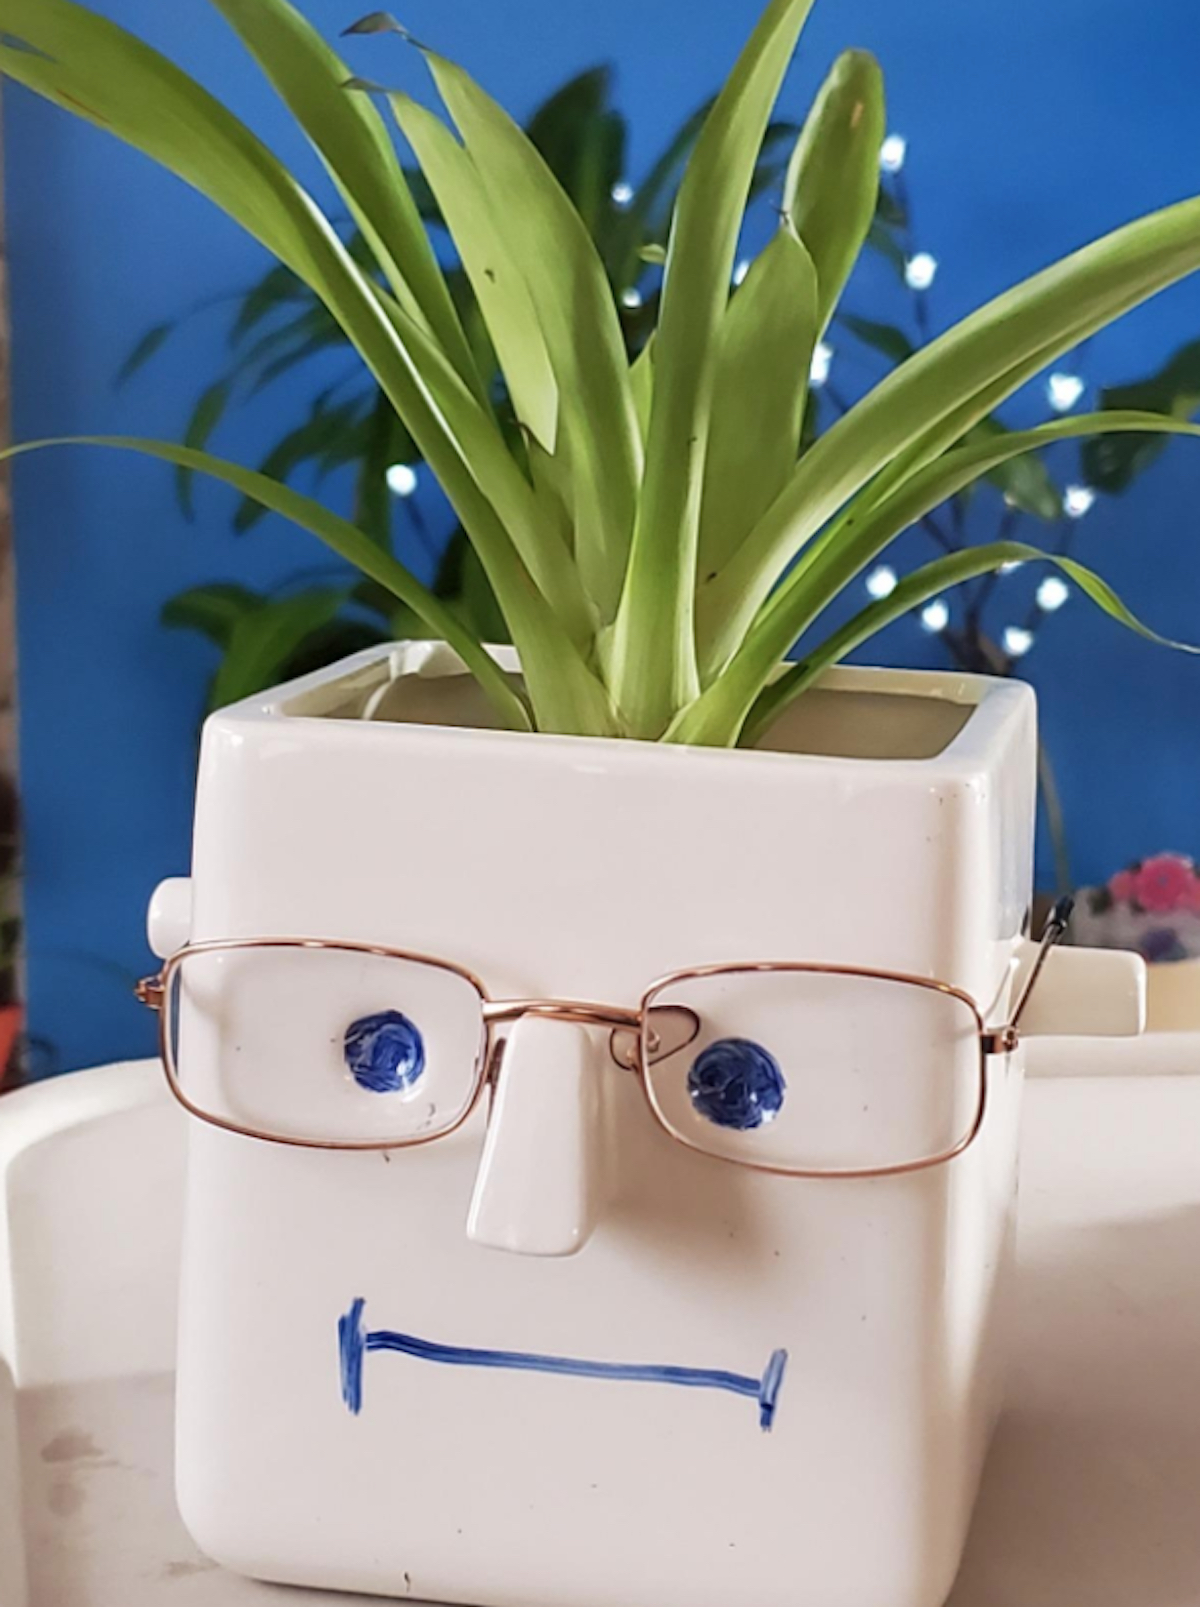 white planer box with face and glasses on it